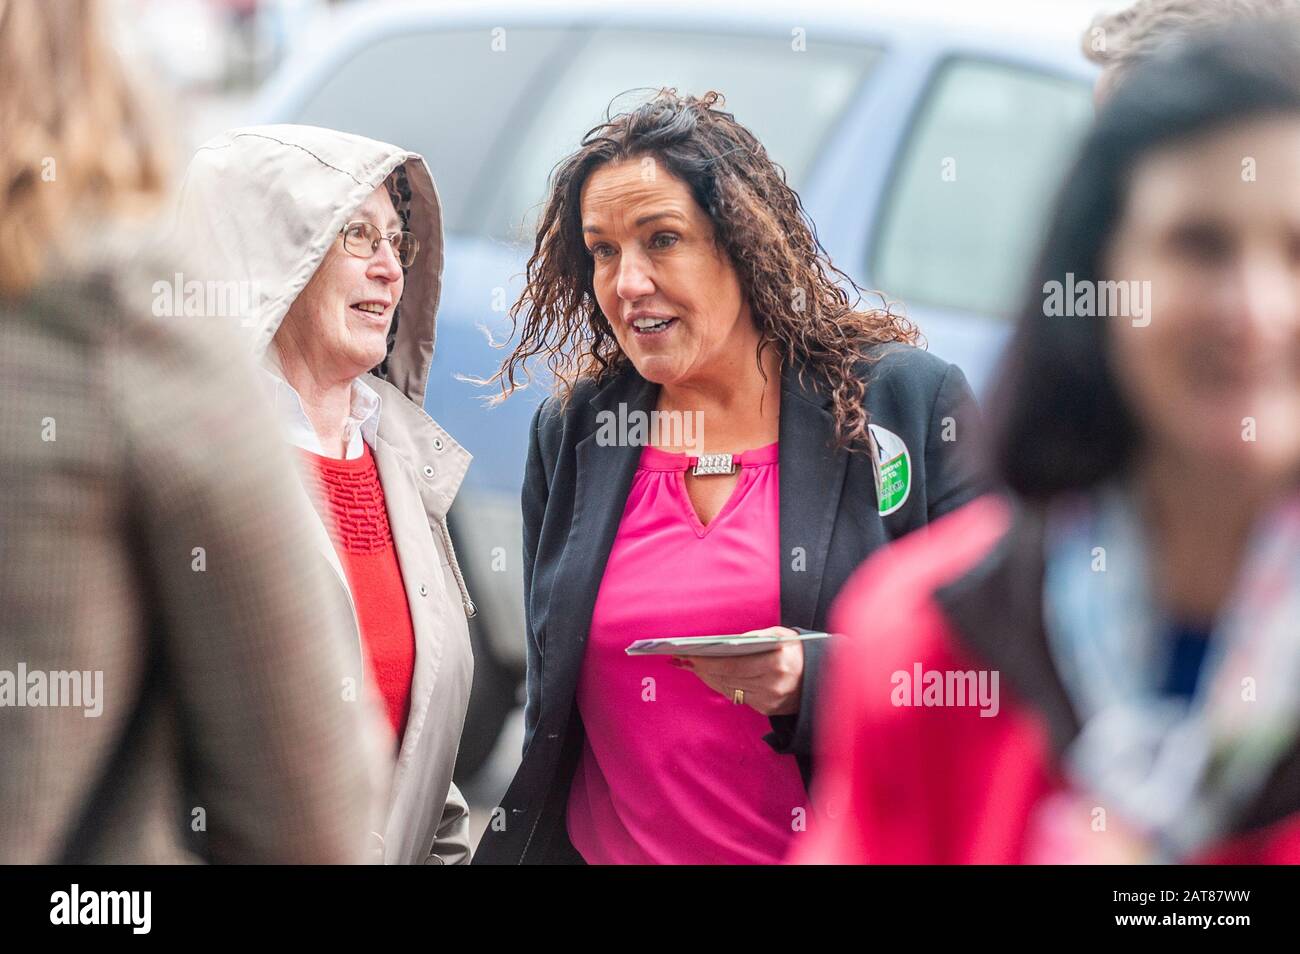 Bantry, West Cork, Ireland. 31st Jan, 2020. Bantry Friday Market was a hive of activity today with 4 general election candidates canvassing the locals. Magaret Murphy-O'Mahony TD was out and about canvassing with her team. Credt Credit: Andy Gibson/Alamy Live News Stock Photo